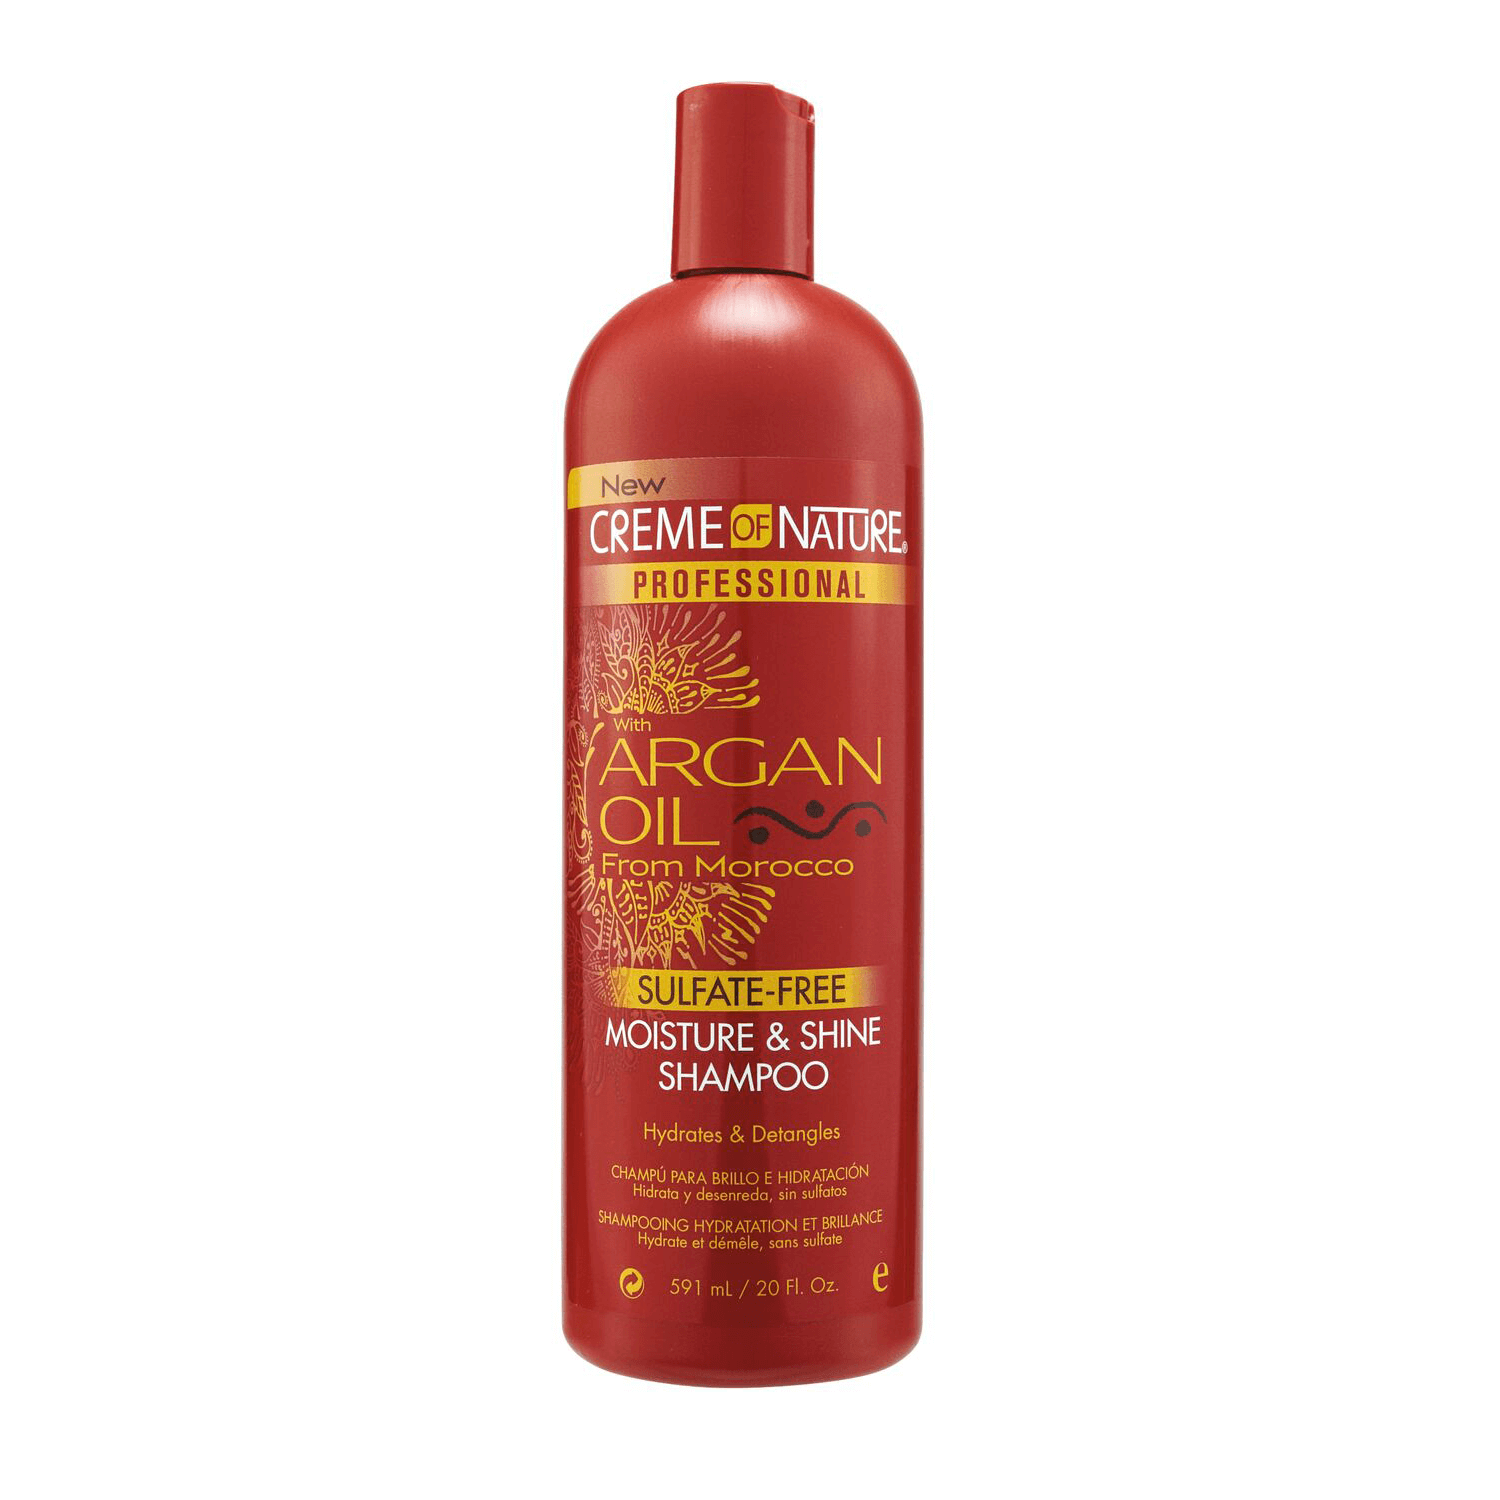 narre Sympatisere massefylde Argan Oil from Morocco Moisture & Shine Sulfate Free Shampoo by Creme of  Nature | Shampoo | Textured Hair | Sally Beauty